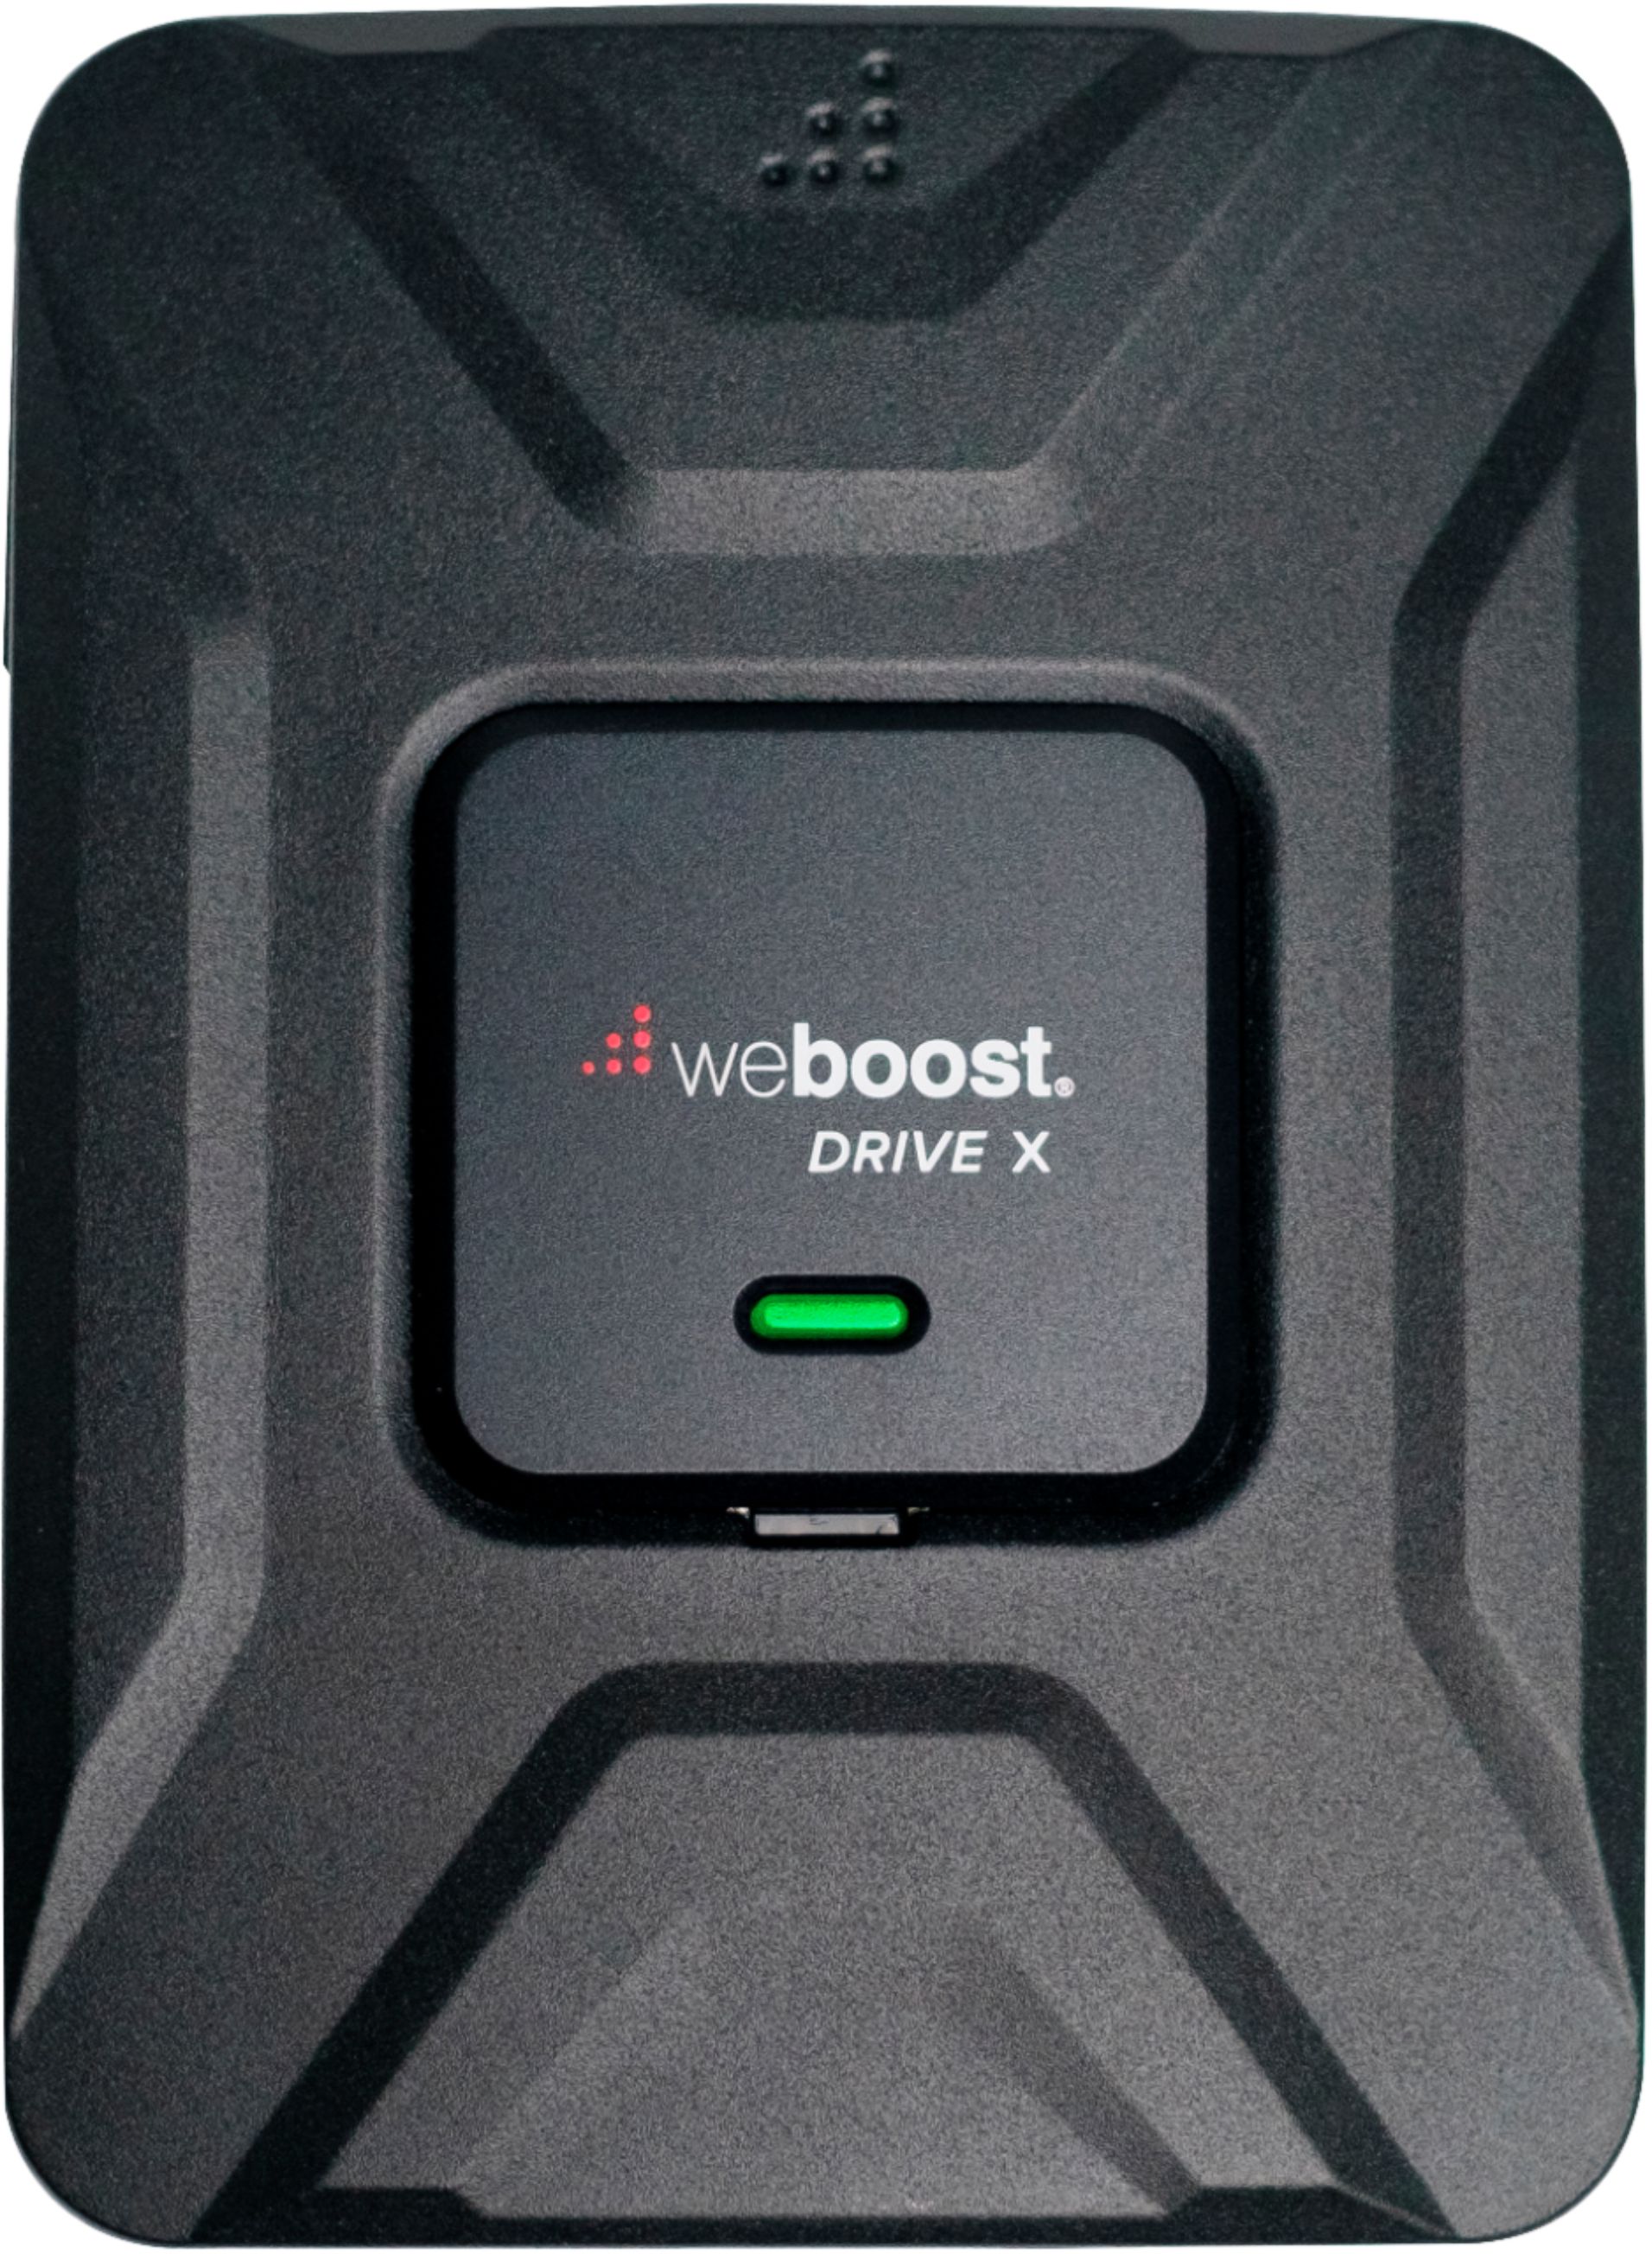 Left View: weBoost - Drive X Vehicle Cell Phone Signal Booster for Car, Truck, Van, or SUV, Boosts 5G & 4G LTE for All U.S. Carriers